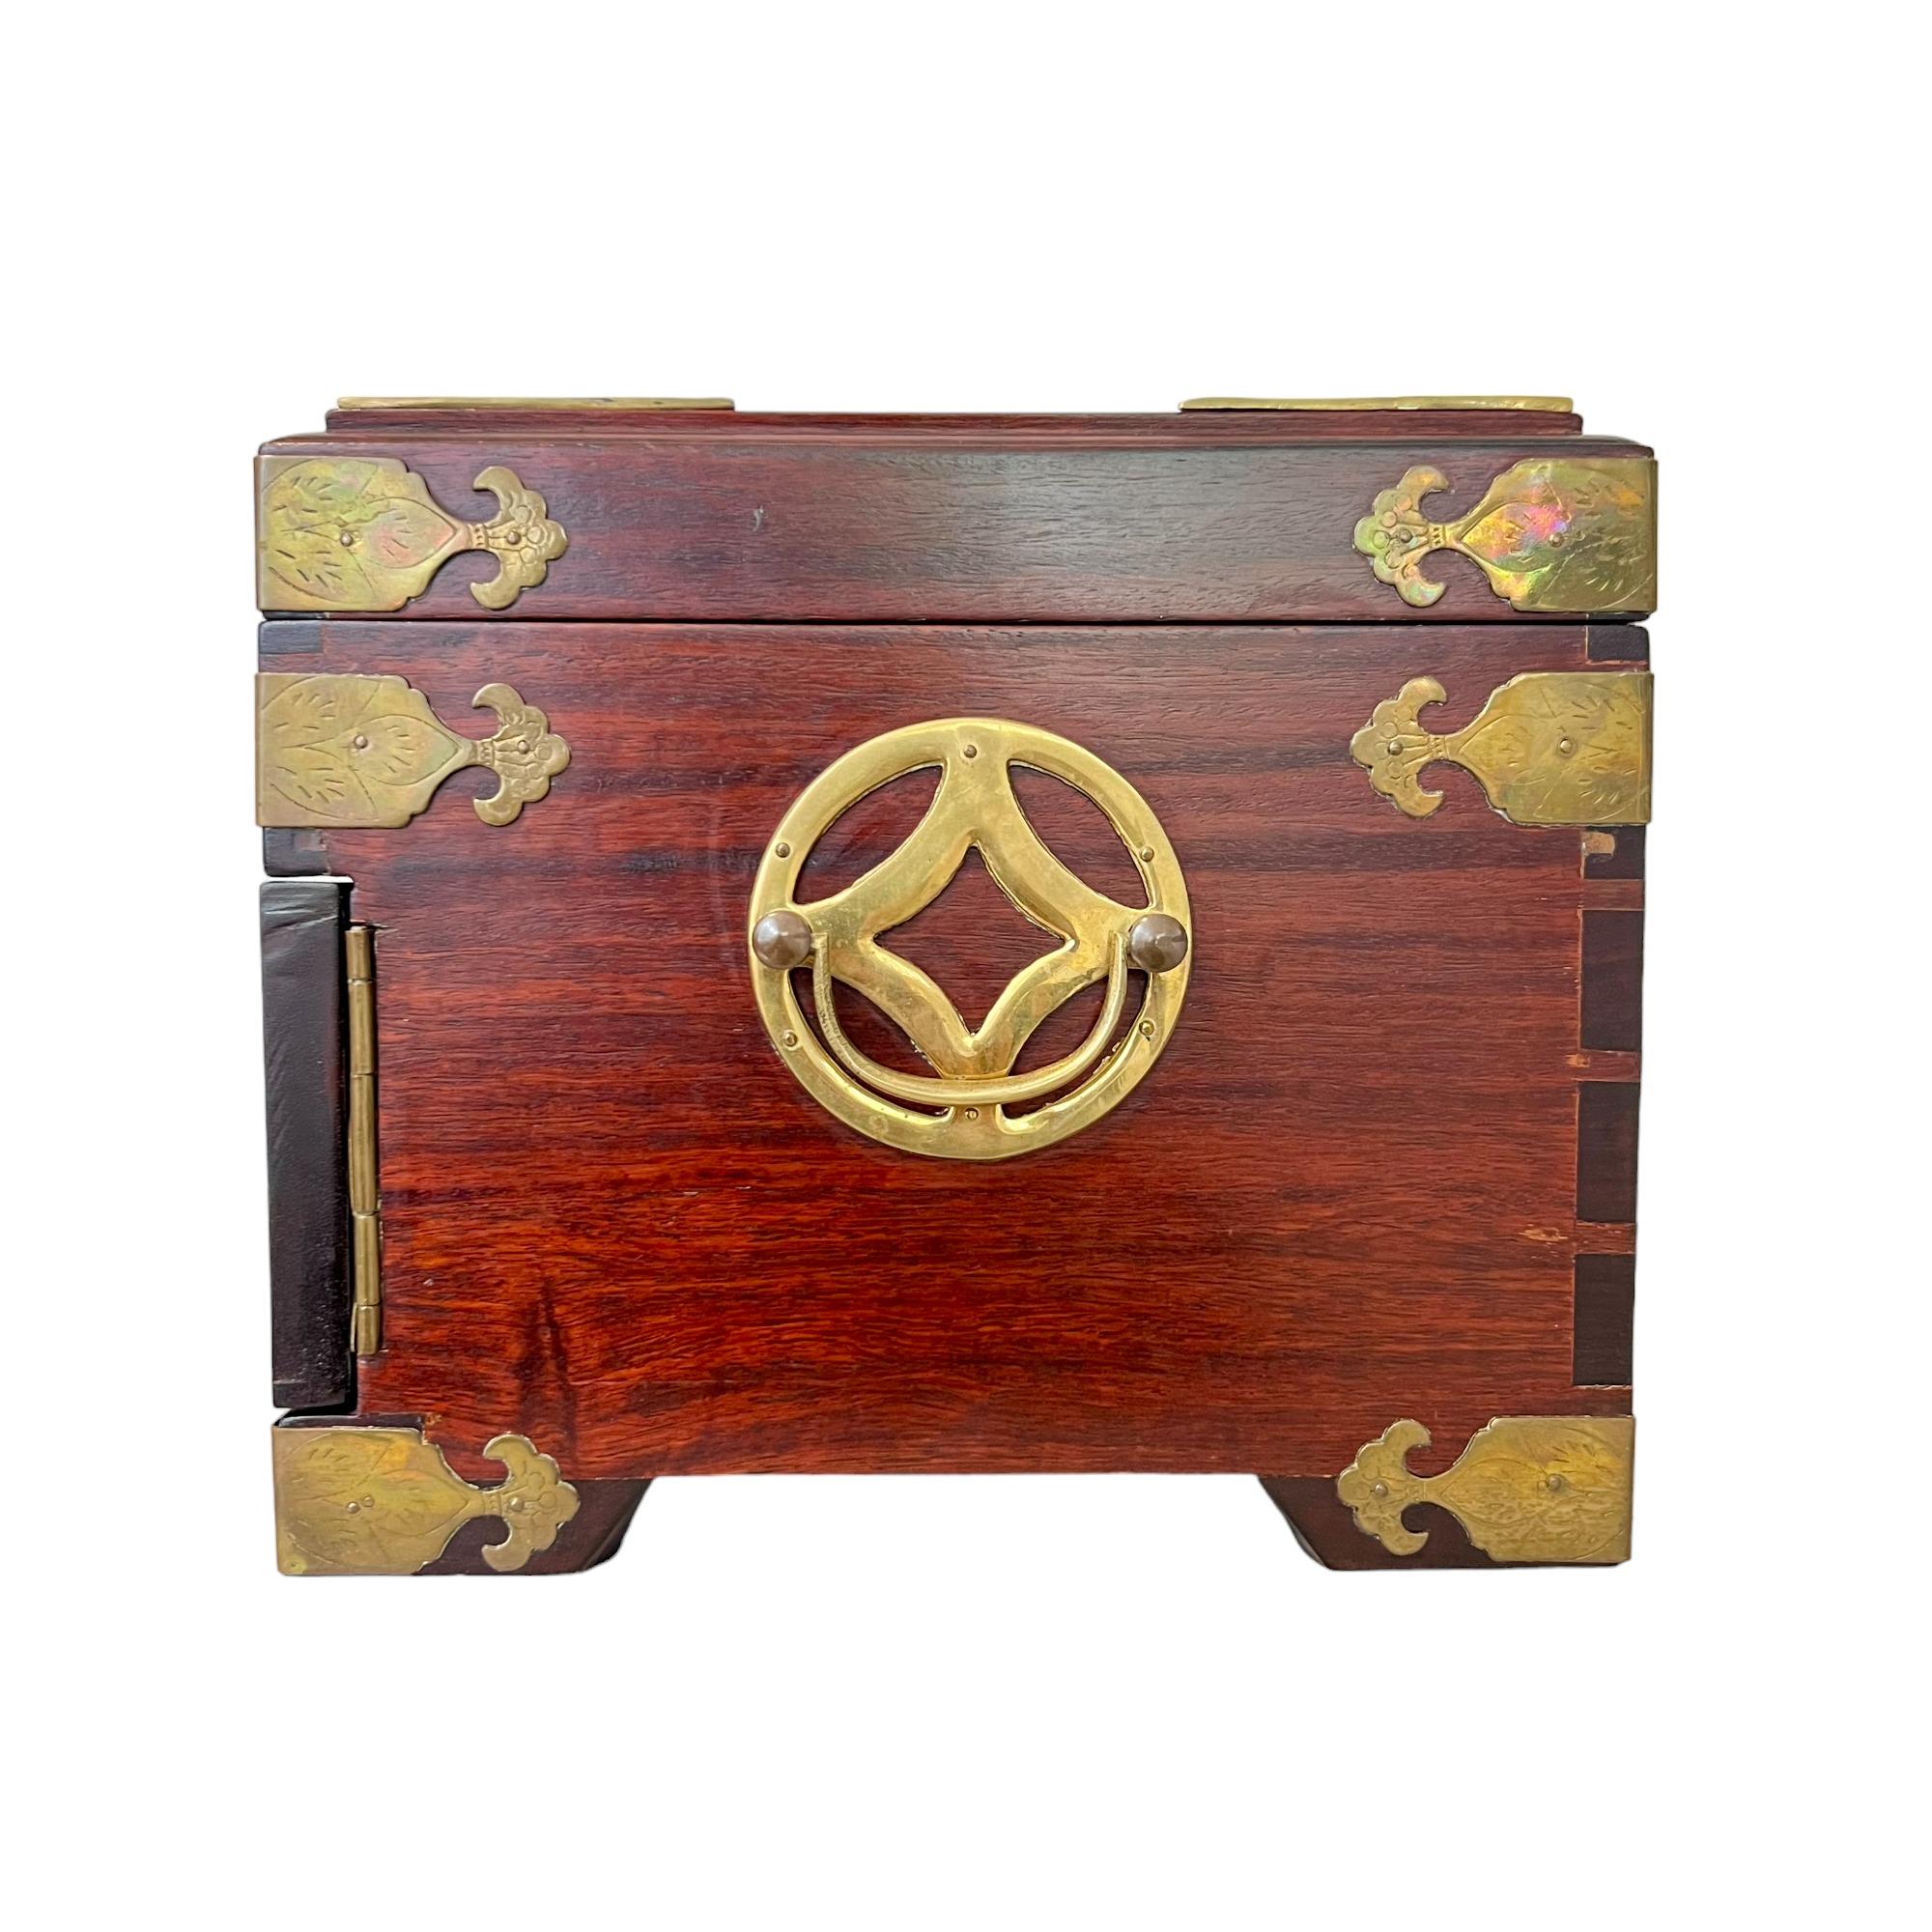 Vintage Chinese Brass Accented Wood Jewelry Box Chest 1